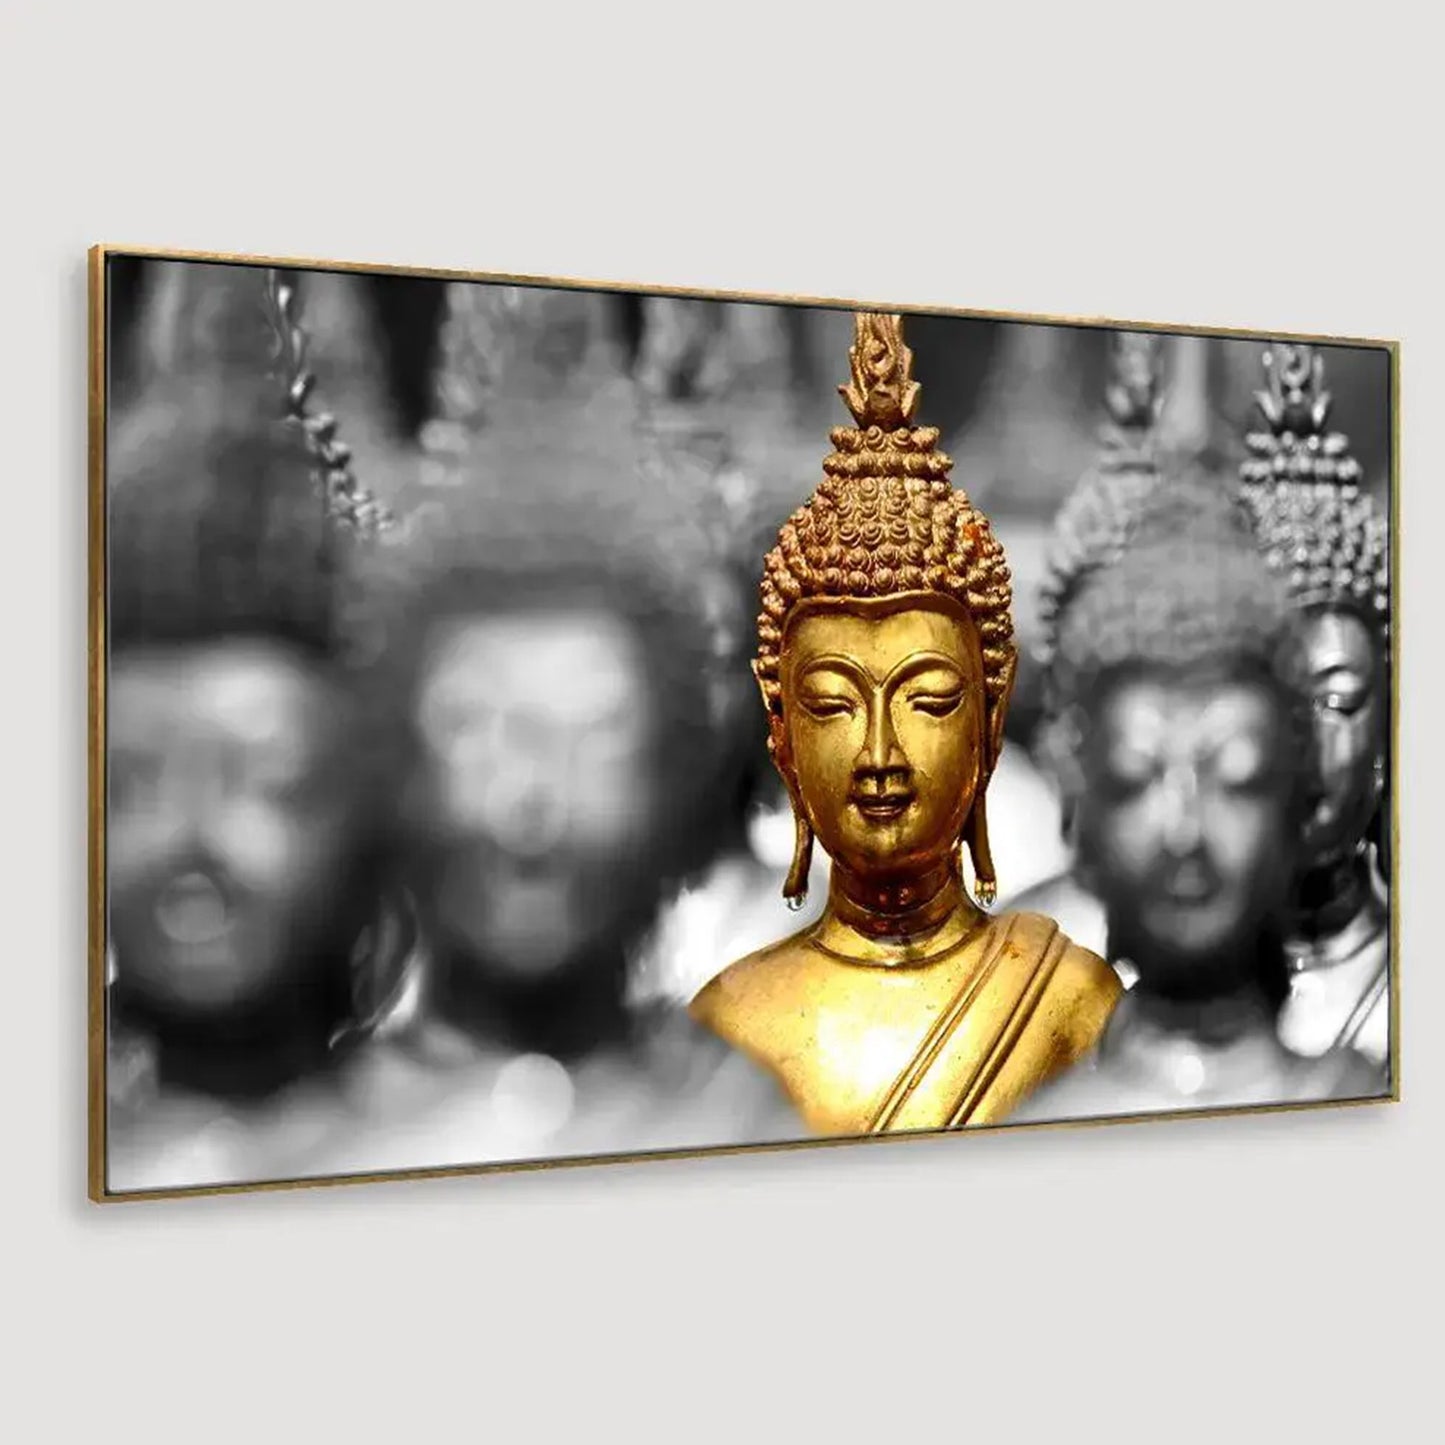 Golden Buddha: Serenity in Art Wall Painting